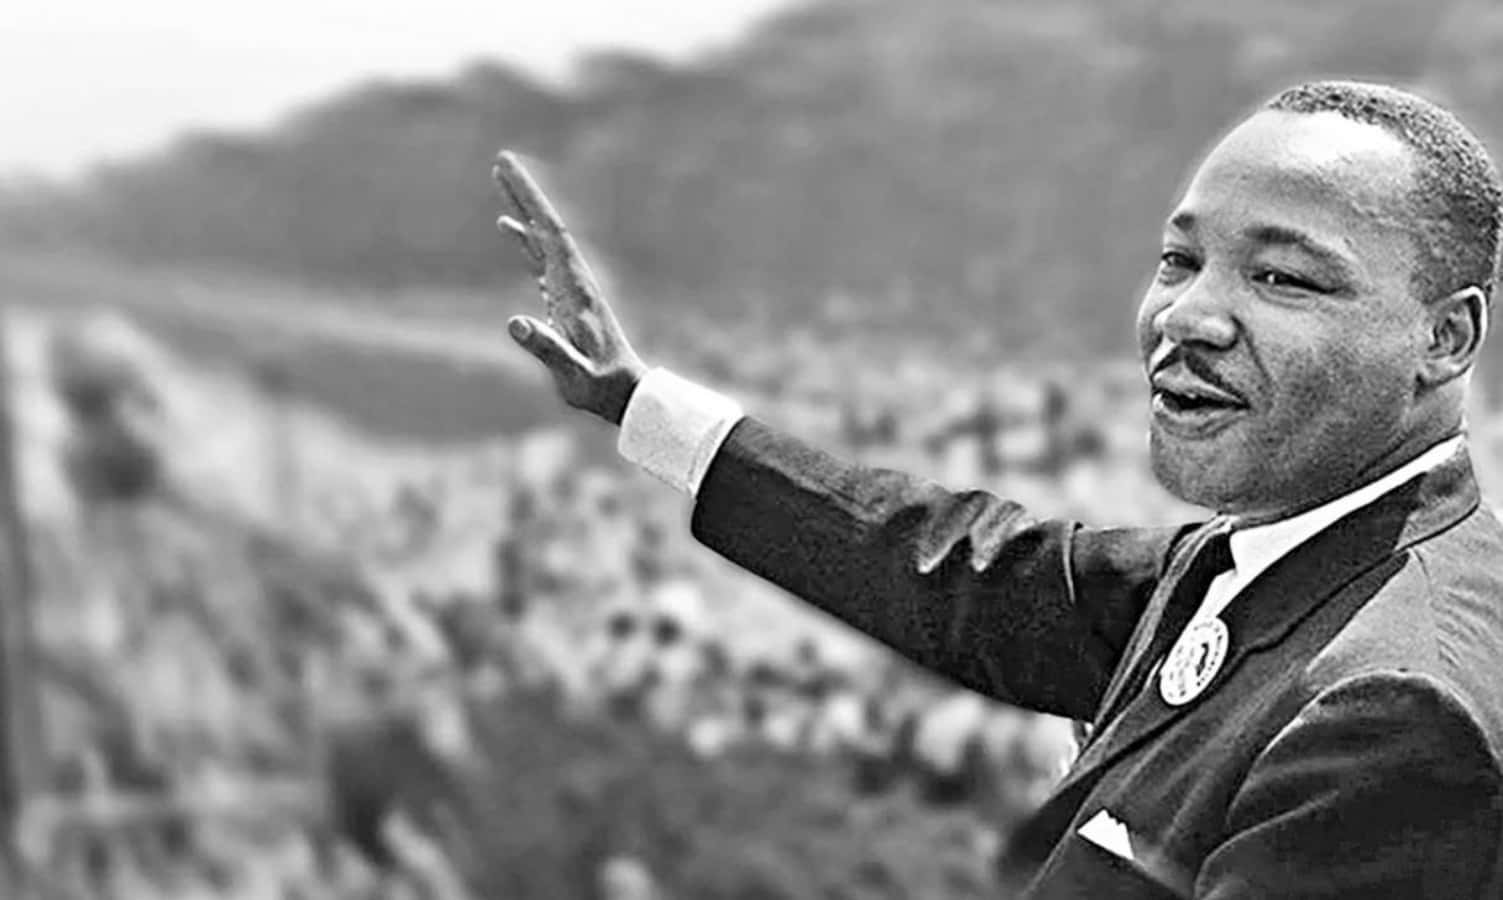 "Dr. Martin Luther King Jr. standing for racial justice and equality."